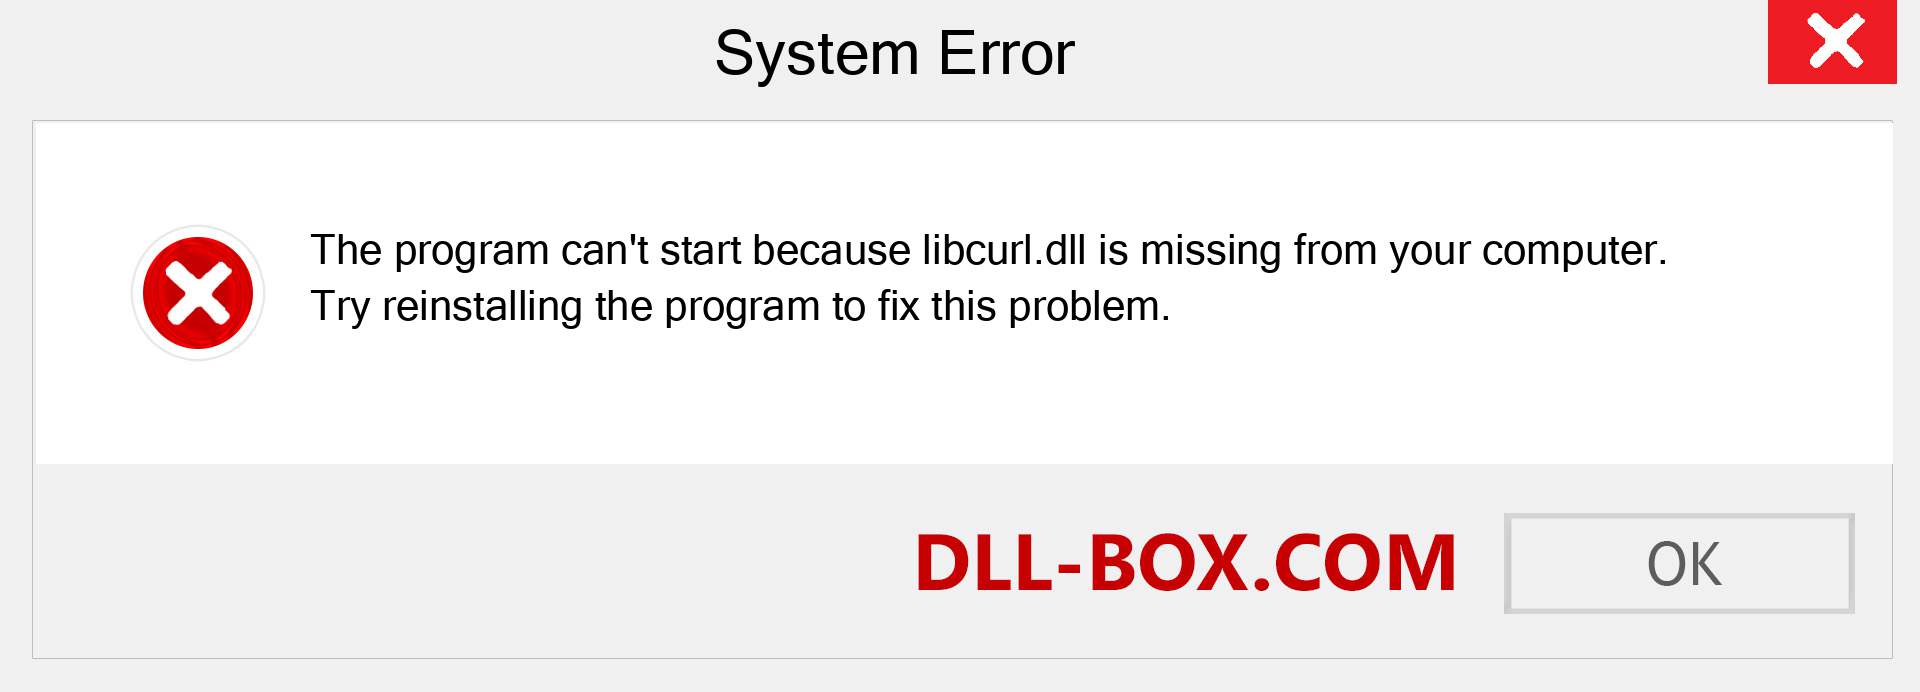  libcurl.dll file is missing?. Download for Windows 7, 8, 10 - Fix  libcurl dll Missing Error on Windows, photos, images